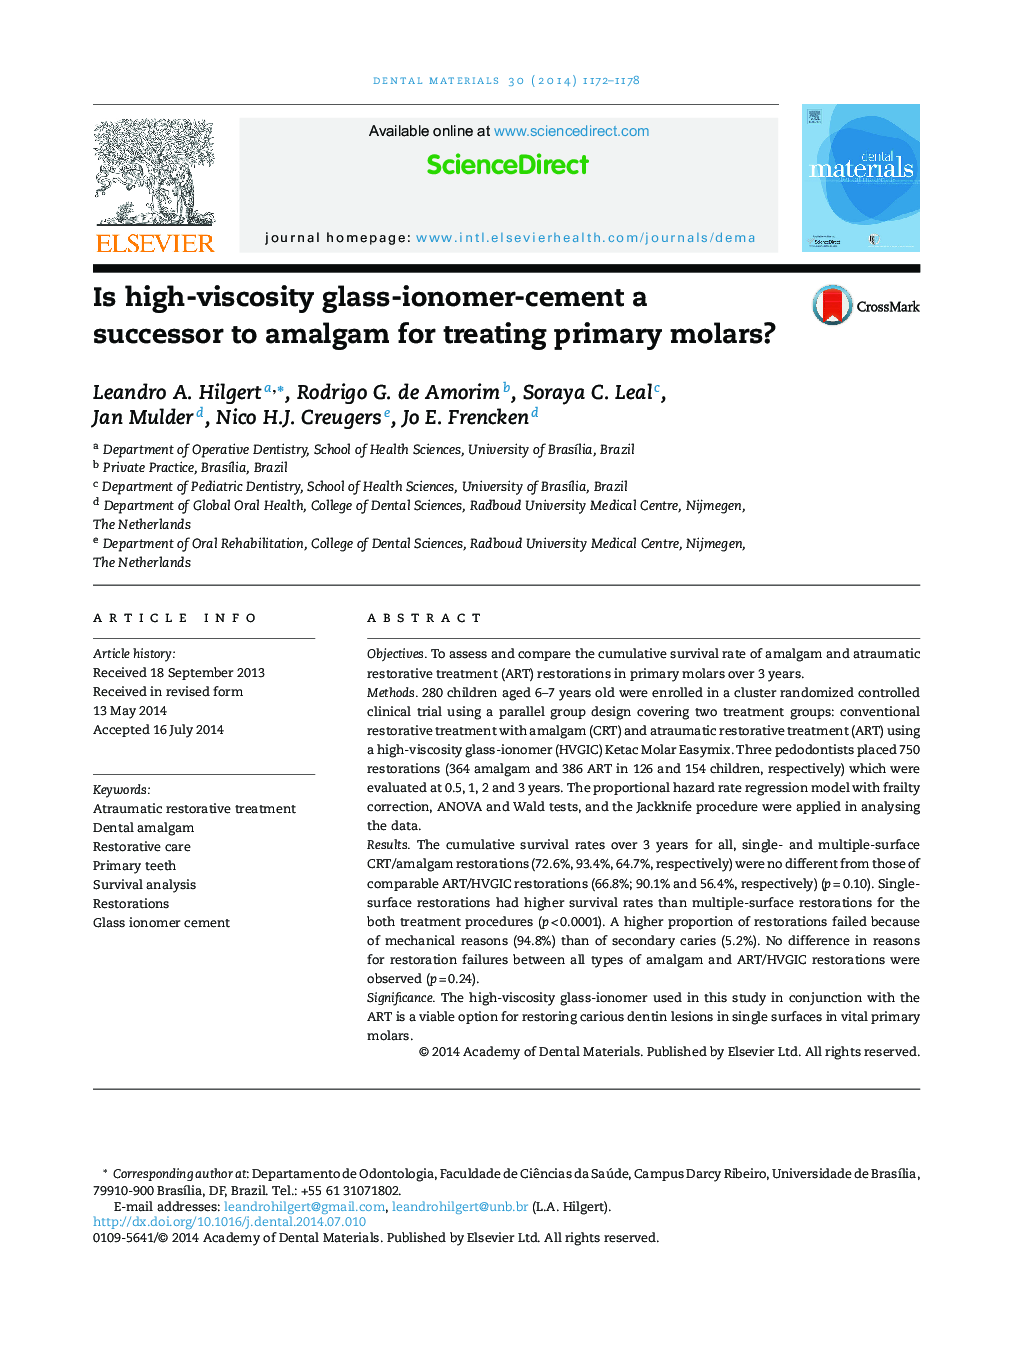 Is high-viscosity glass-ionomer-cement a successor to amalgam for treating primary molars?